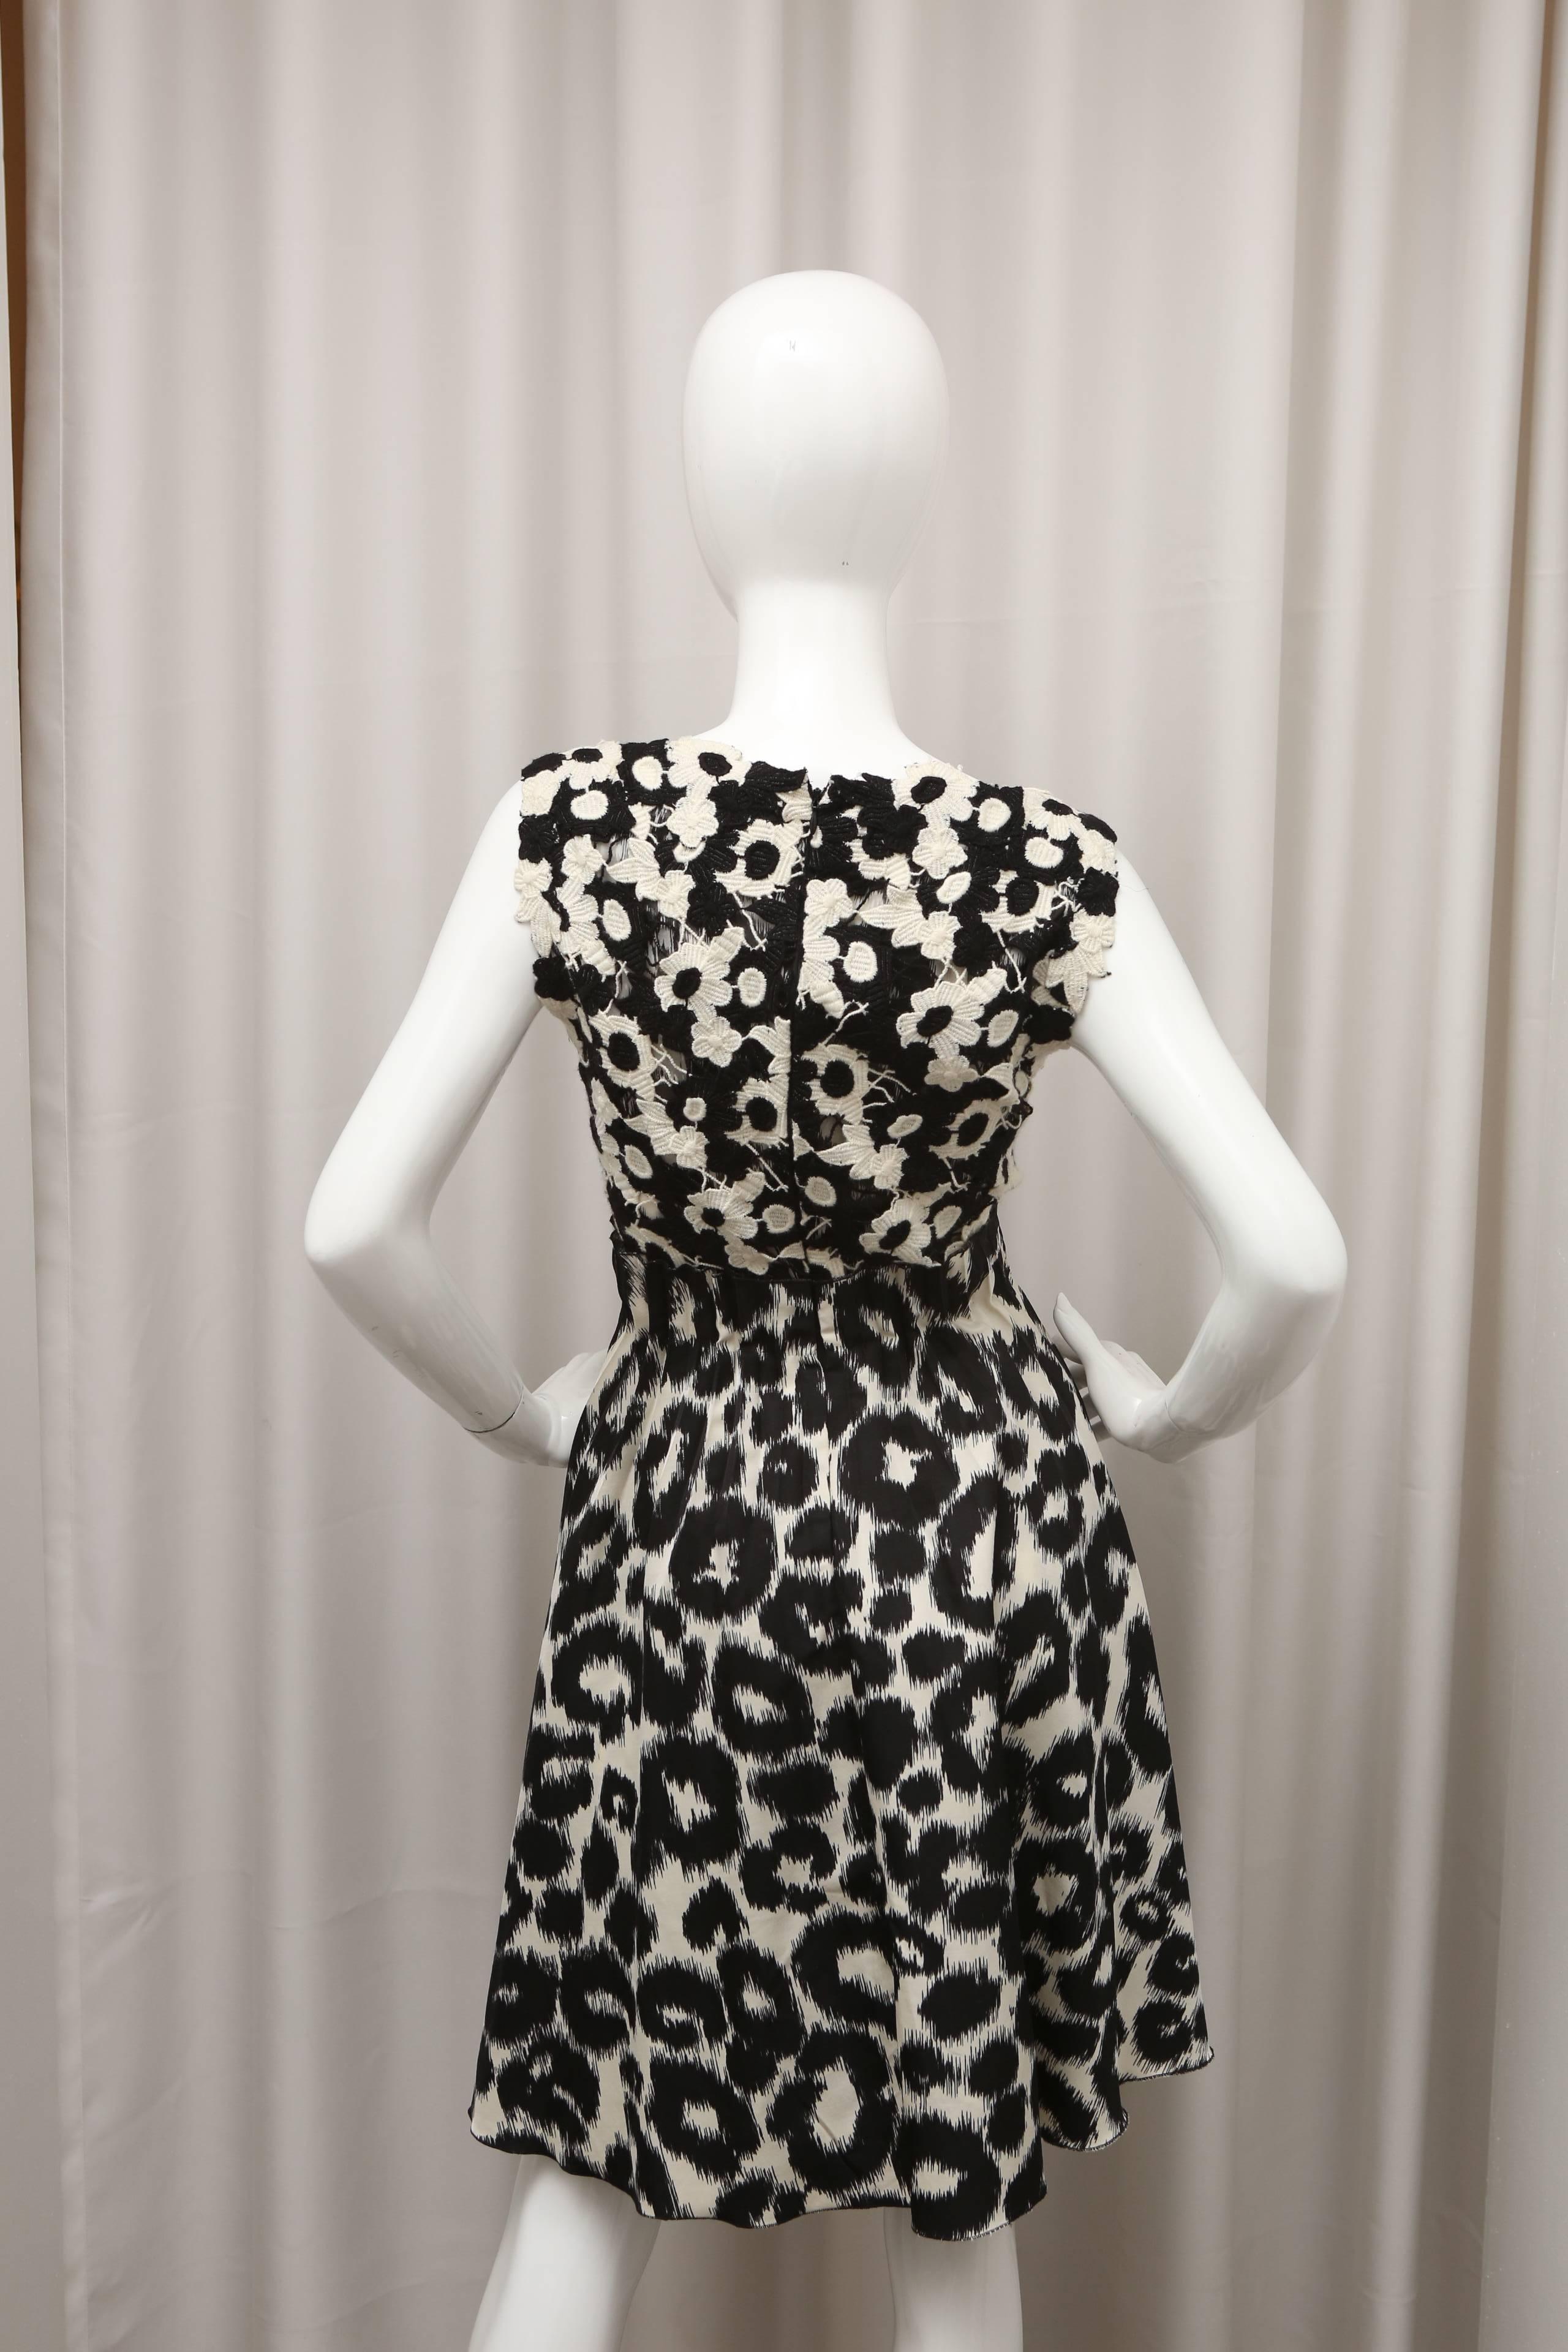 Black and white floral patterned top and leopard print bottom dress.